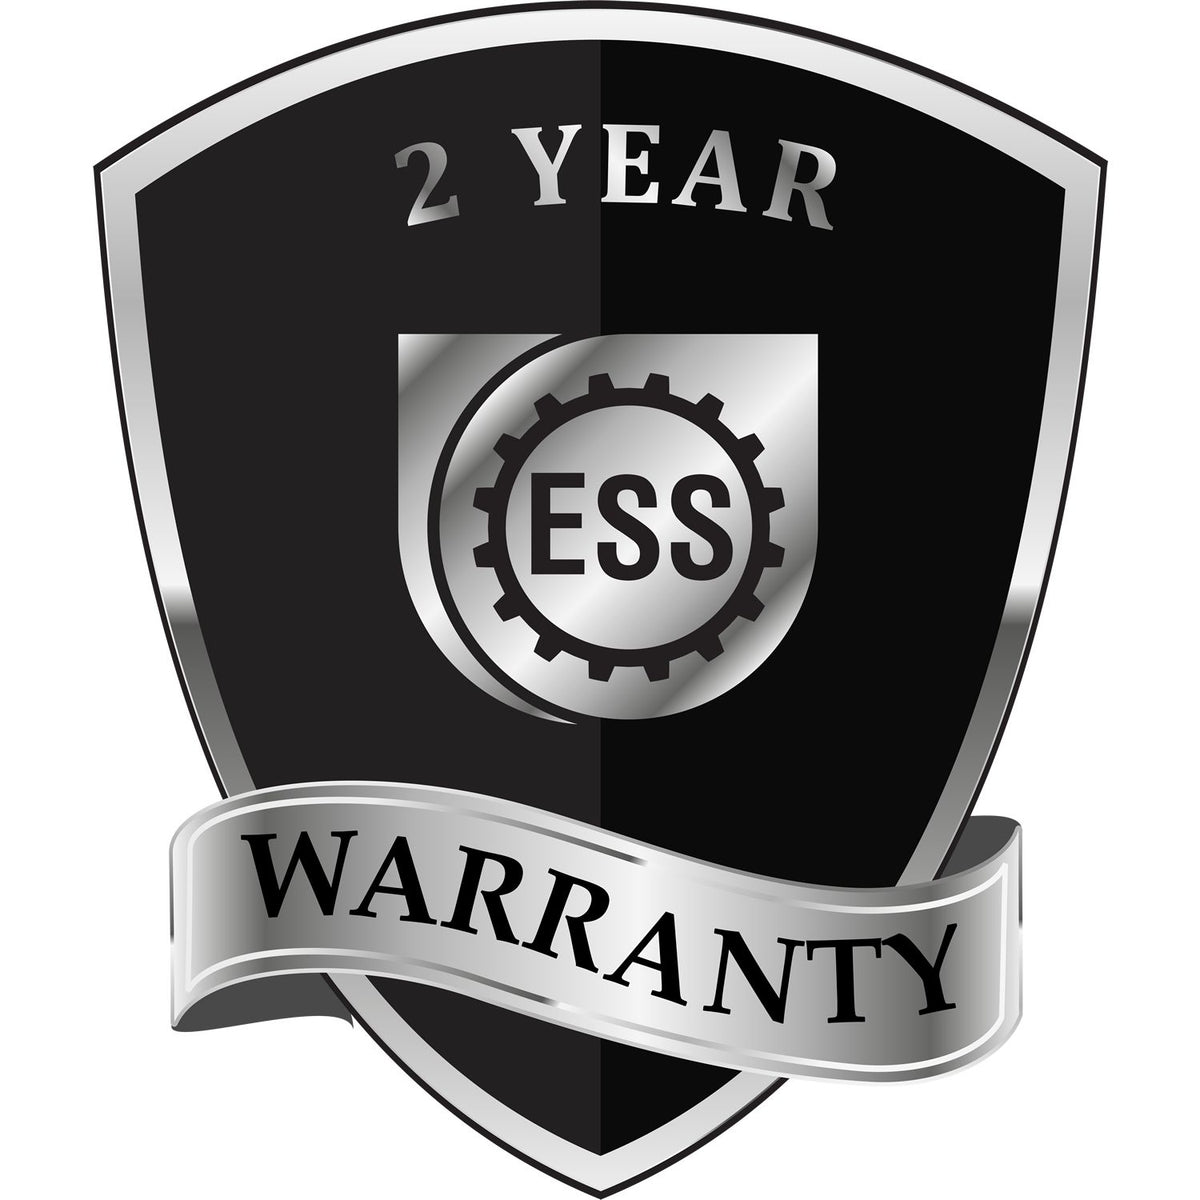 A black and silver badge or emblem showing warranty information for the State of Louisiana Extended Long Reach Geologist Seal